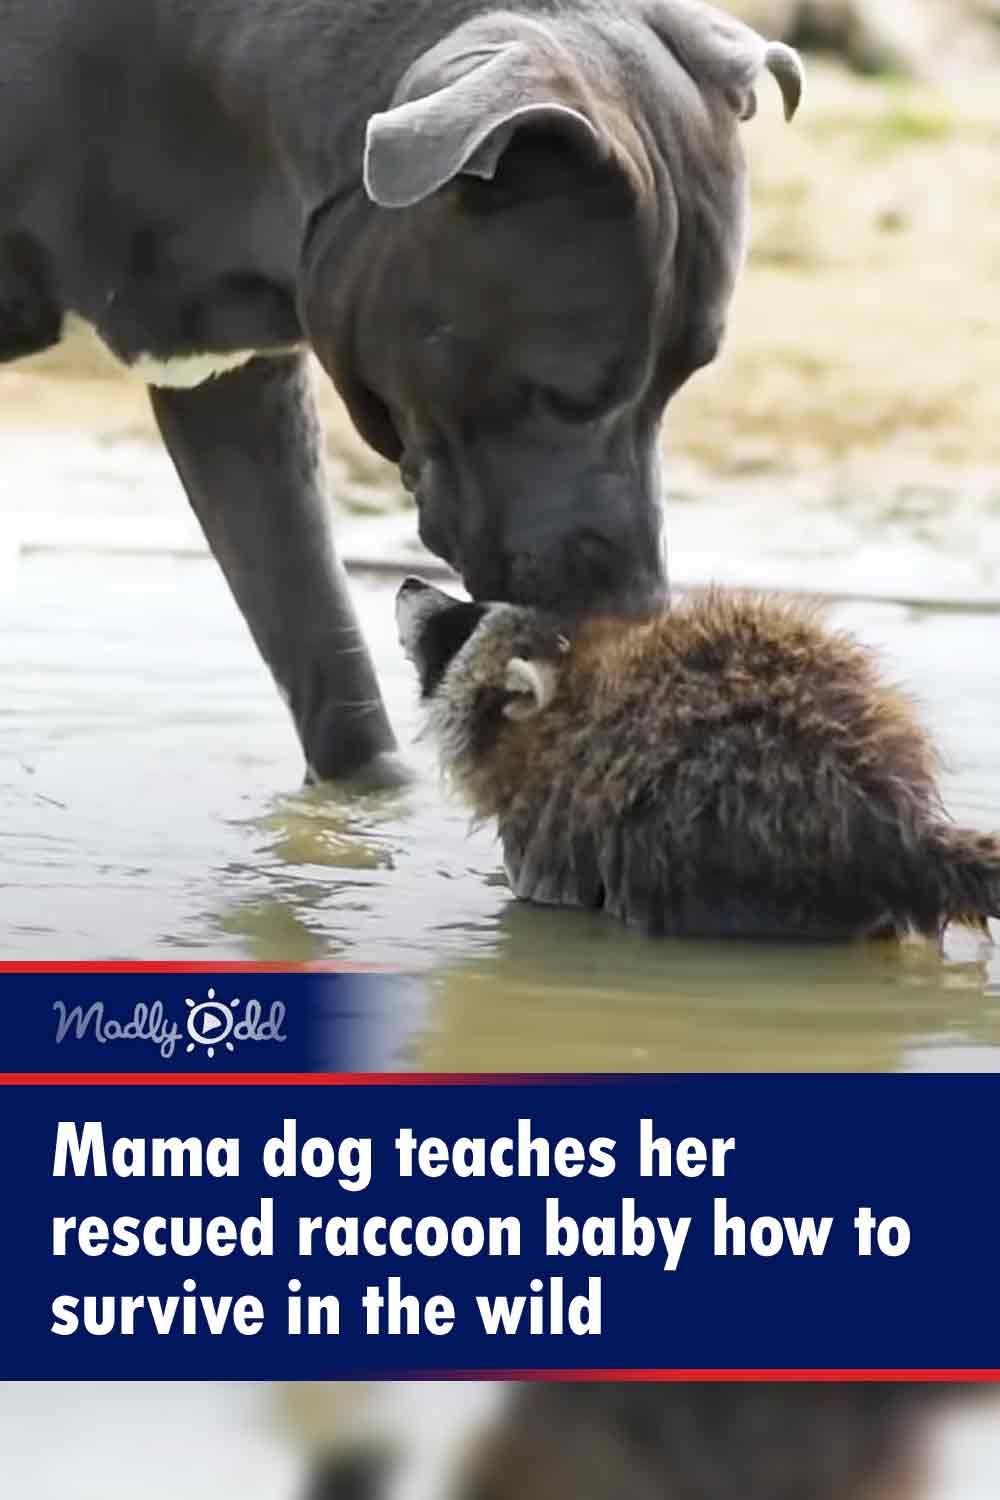 Mama dog teaches her rescued raccoon baby how to survive in the wild